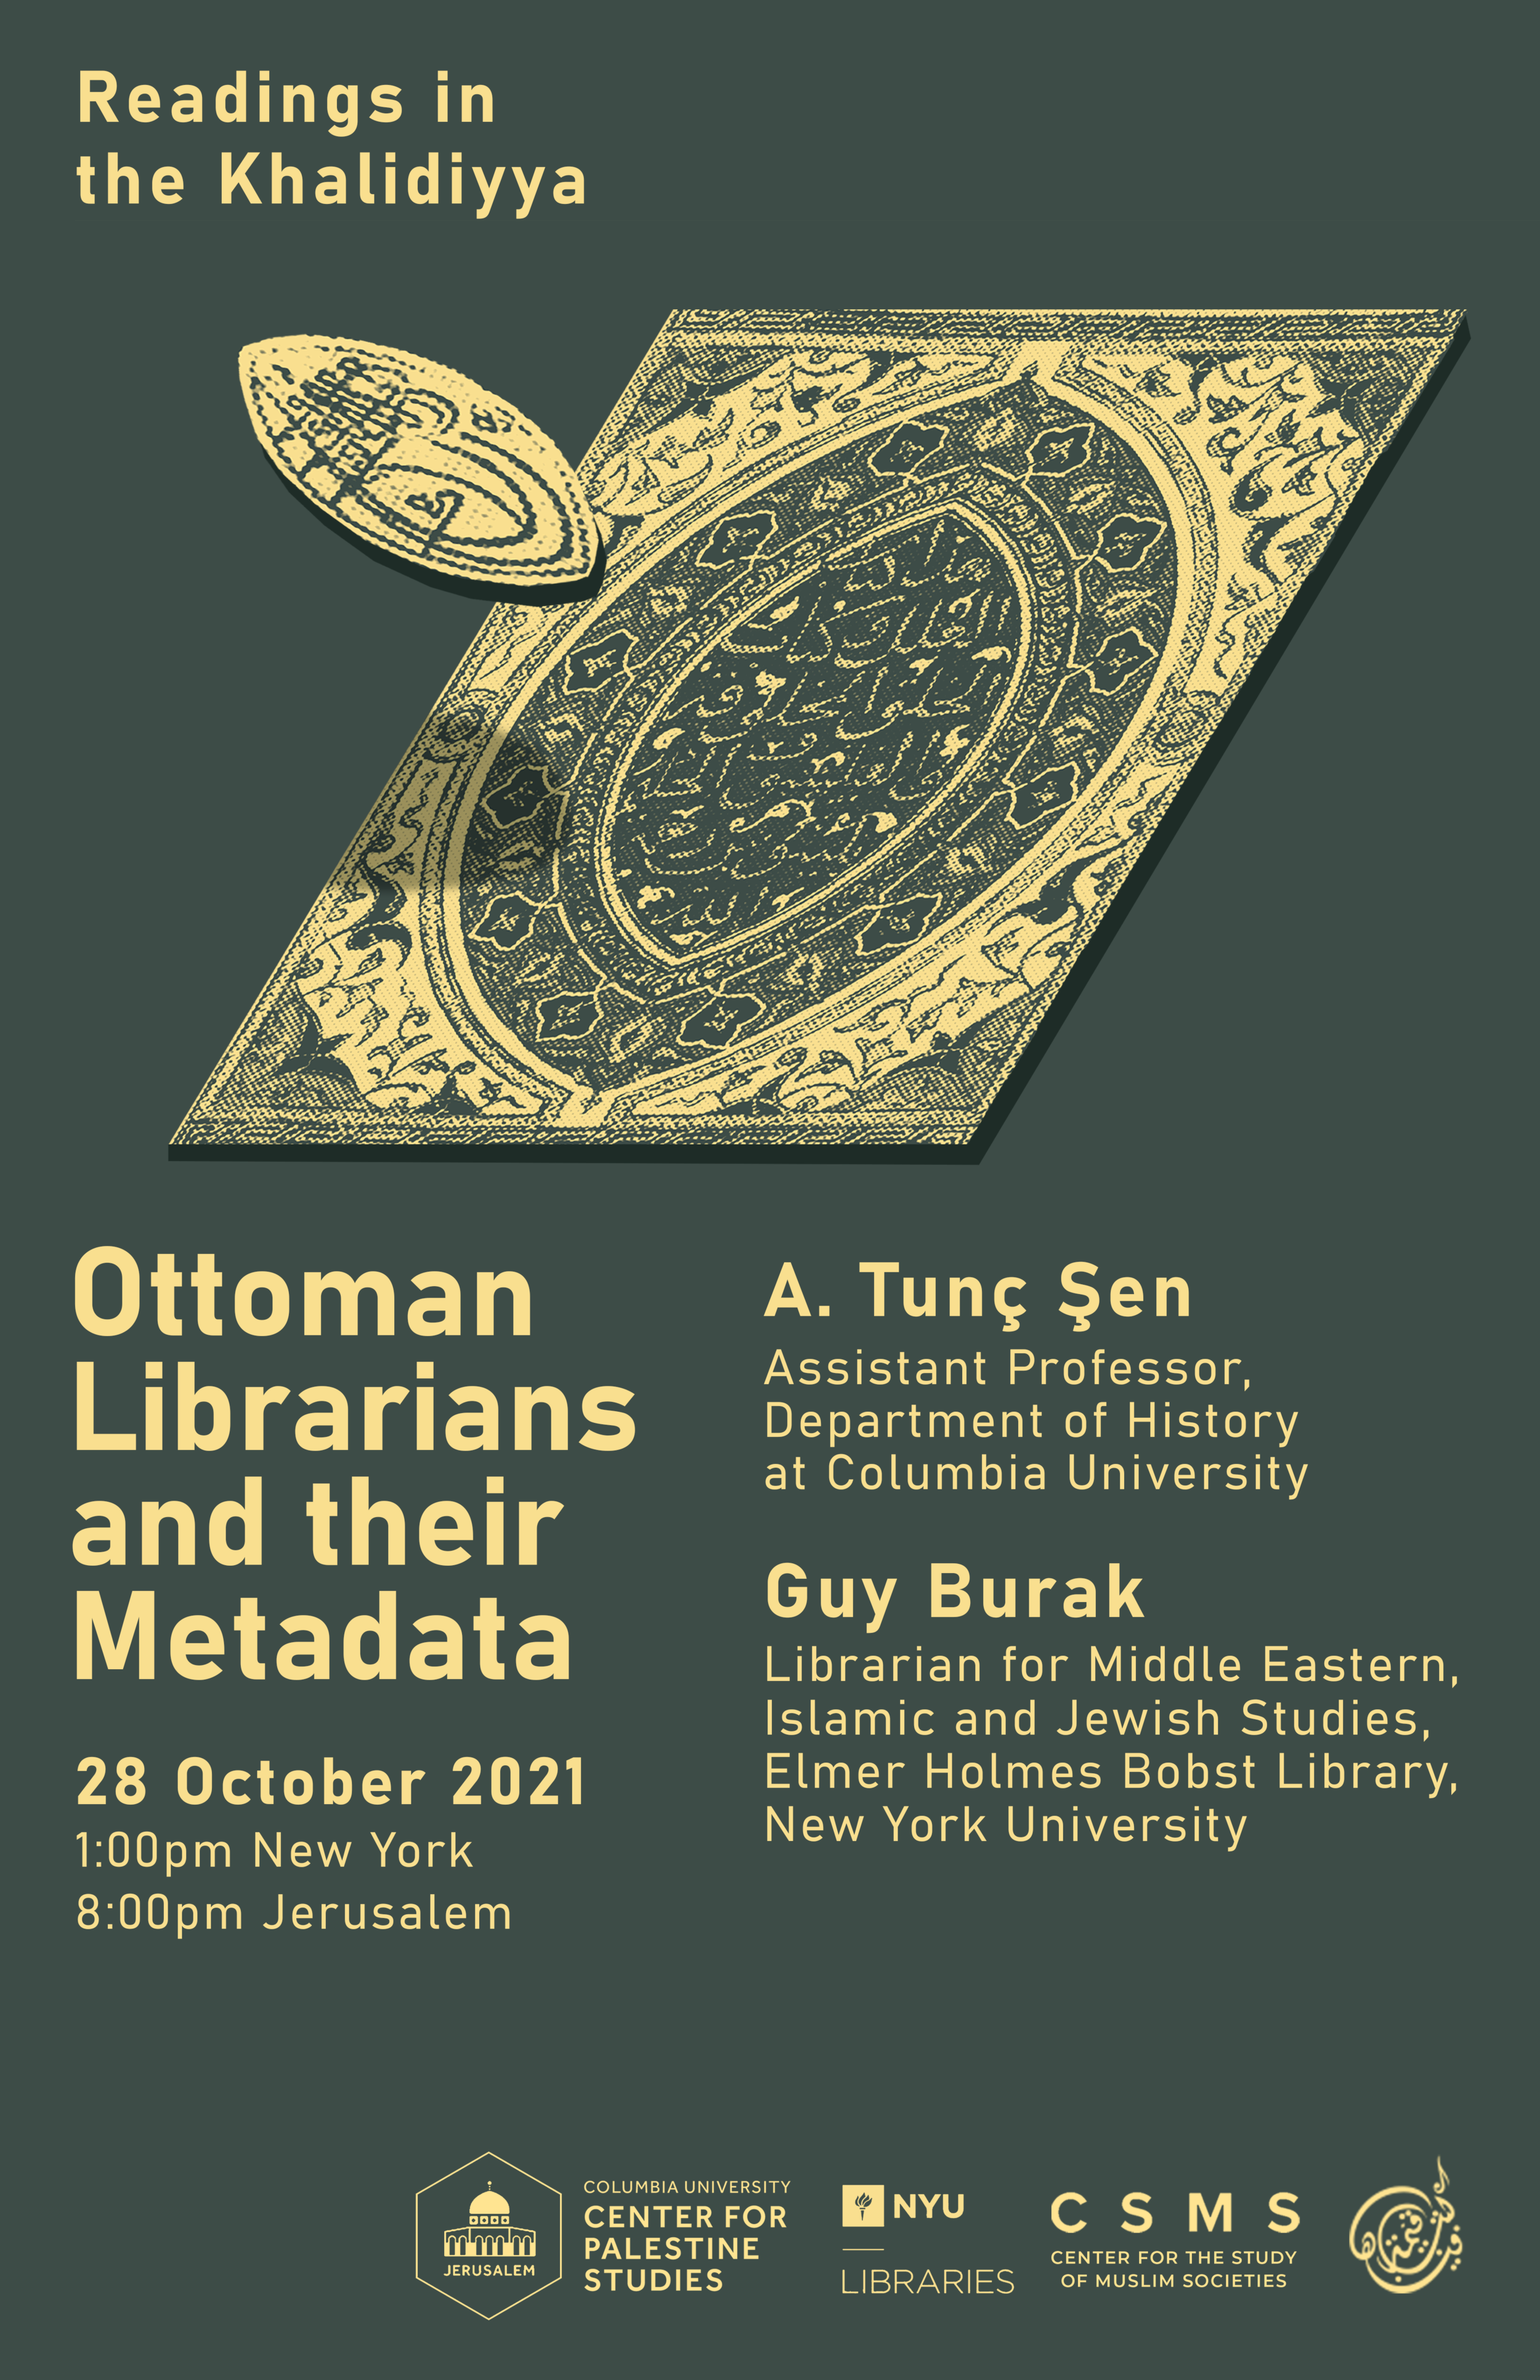 OTTOMAN LIBRARIANS AND THEIR METADATA 10 19 2021.png